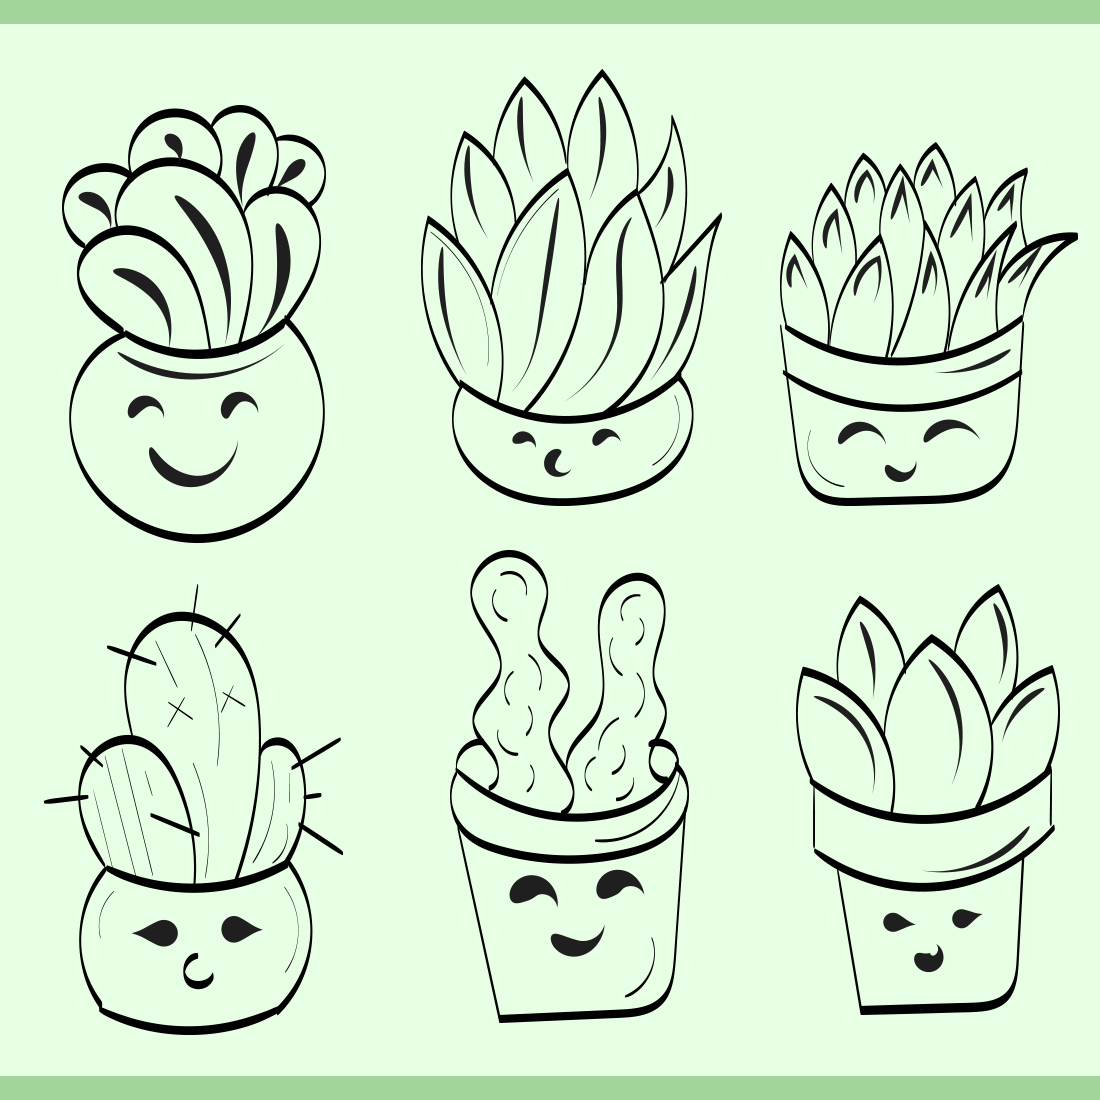 12 Cute Hand Drawn Cactus - Only $10 facebook image.